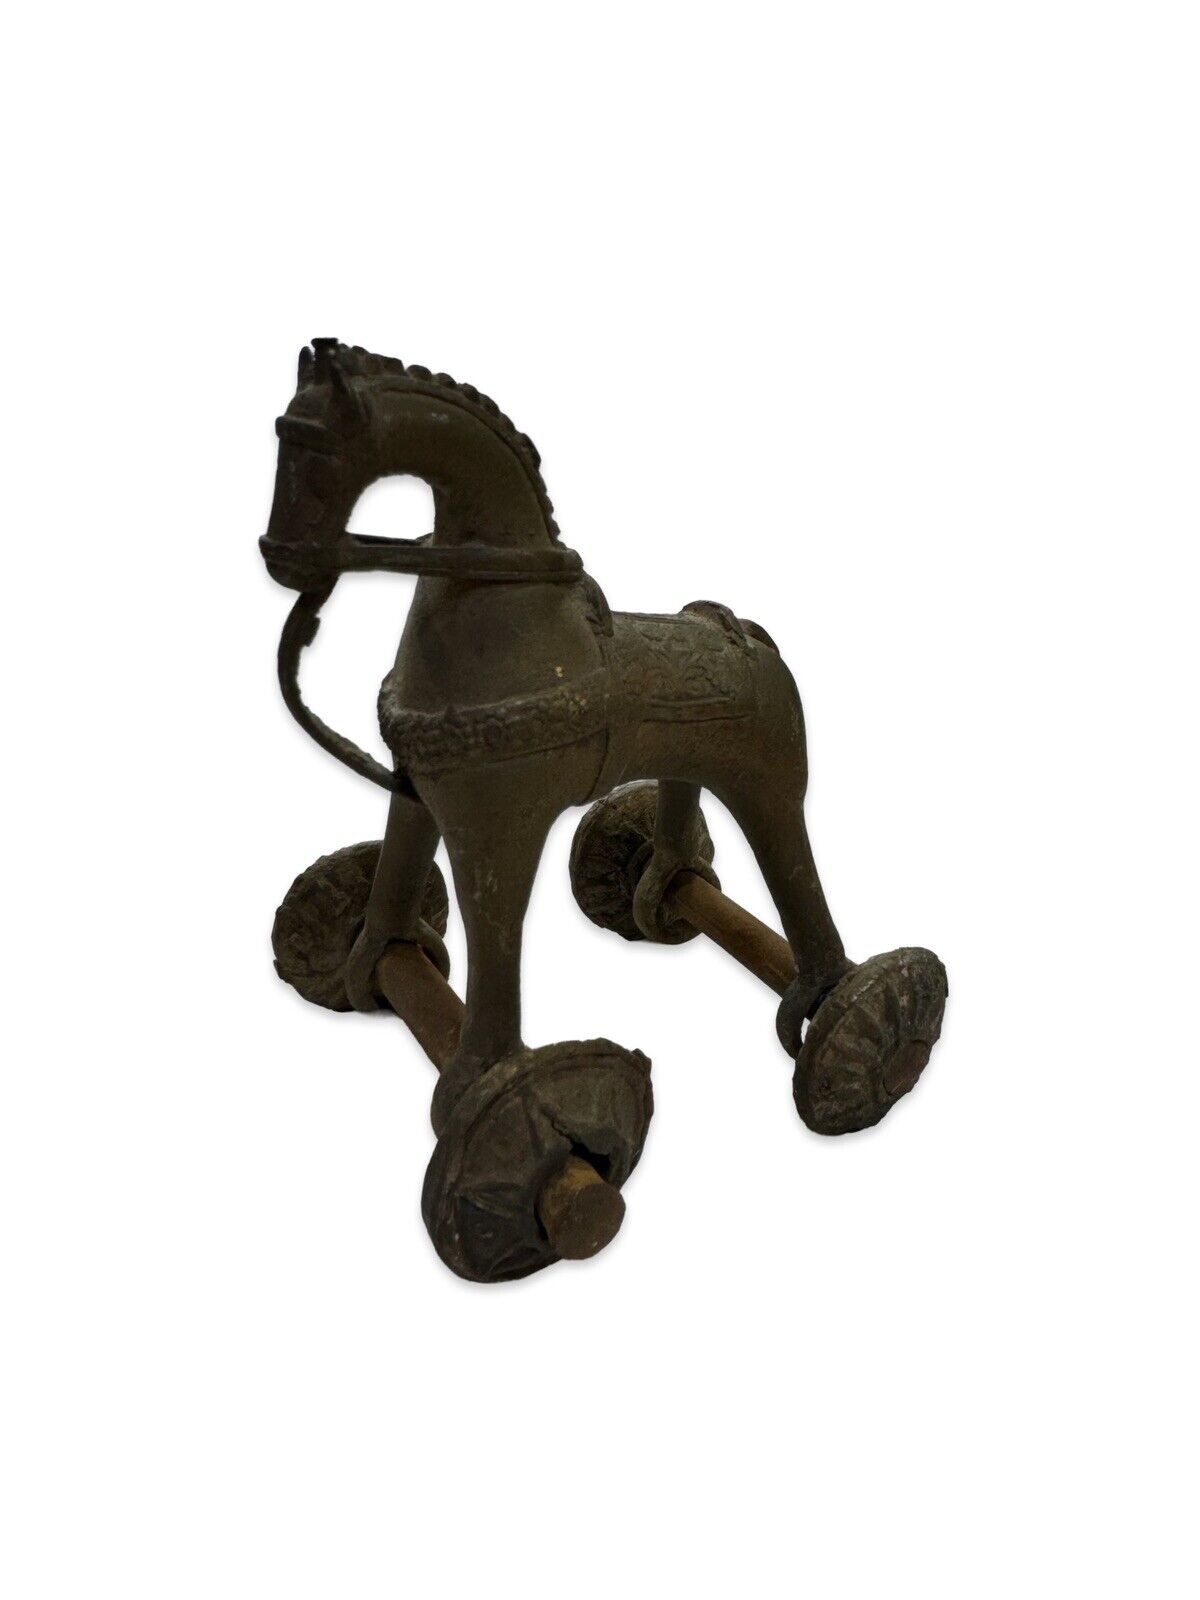 Brass Temple Relic Toy Figurine on Wheels on horse temple